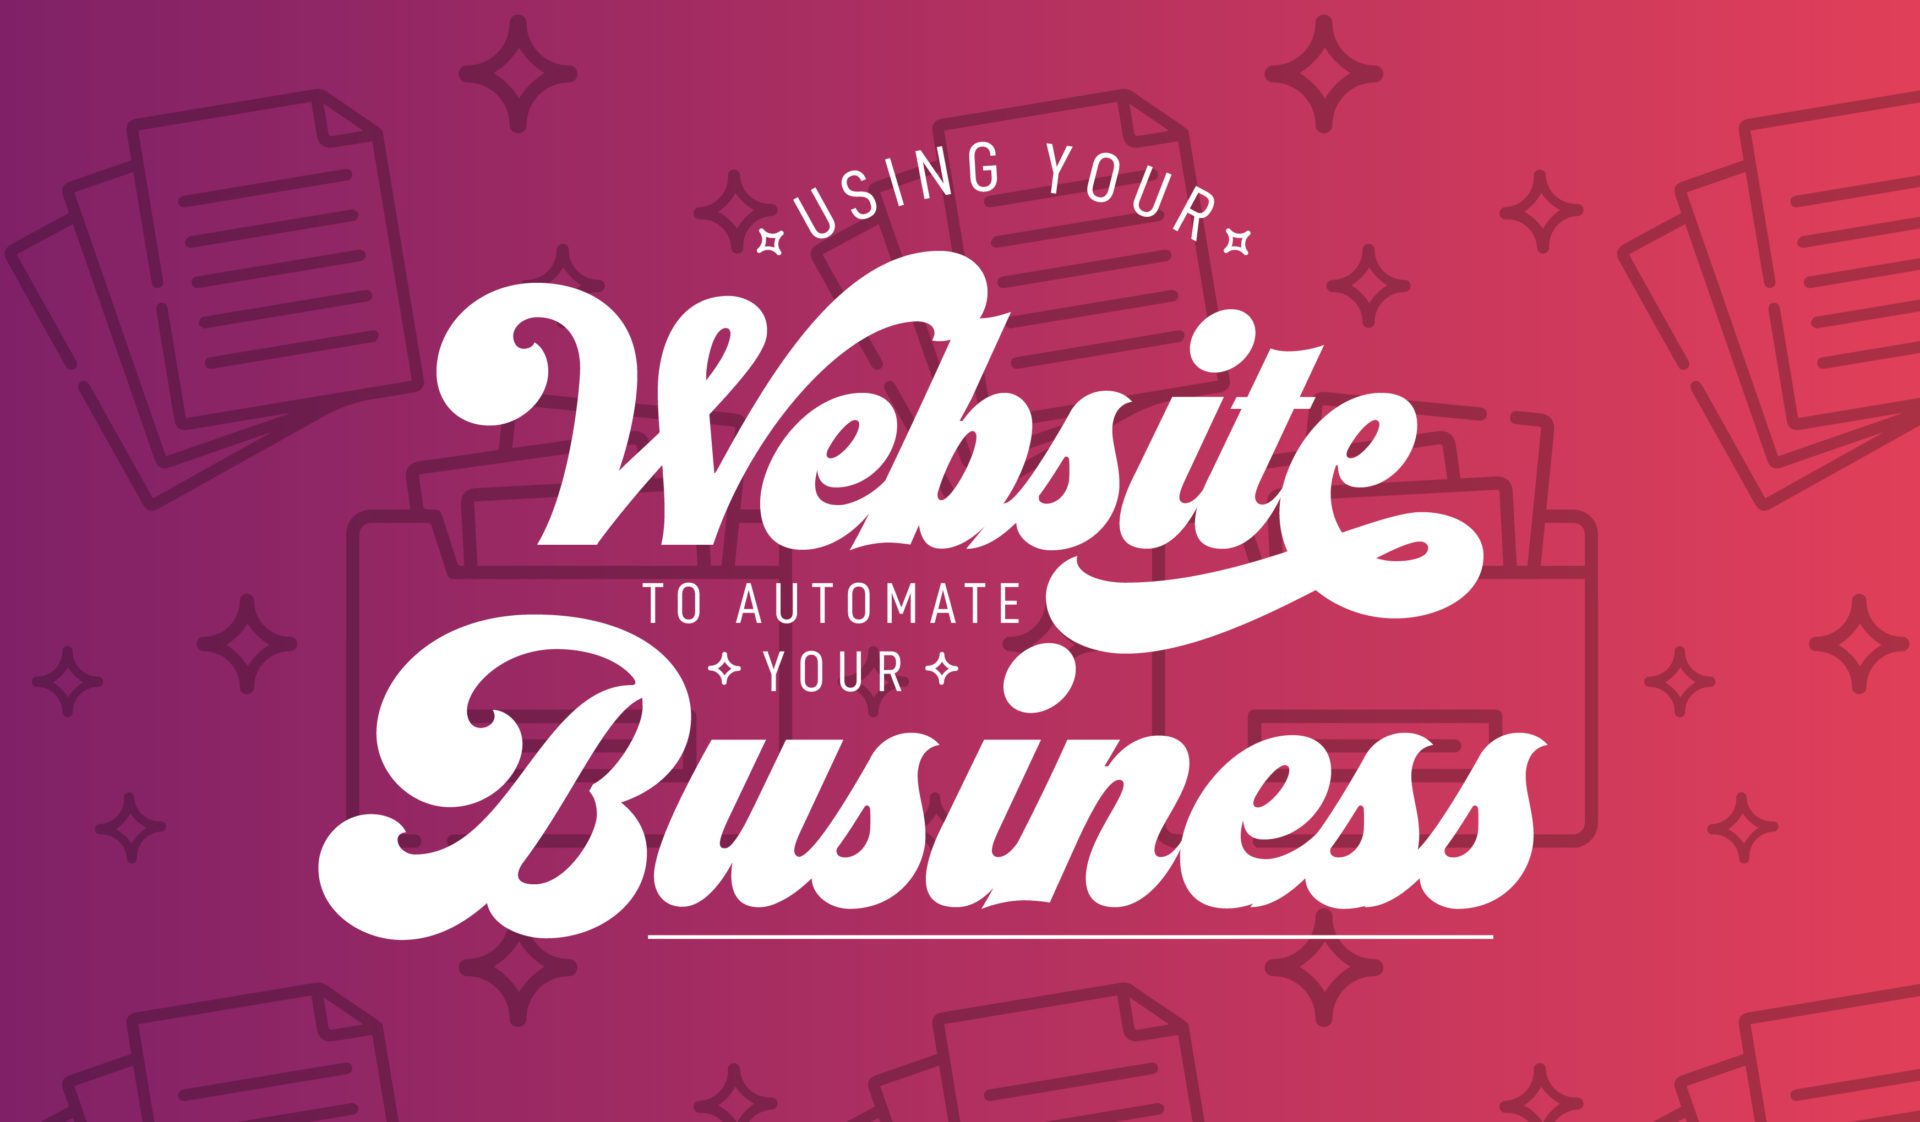 Using your Website to Automate your Business